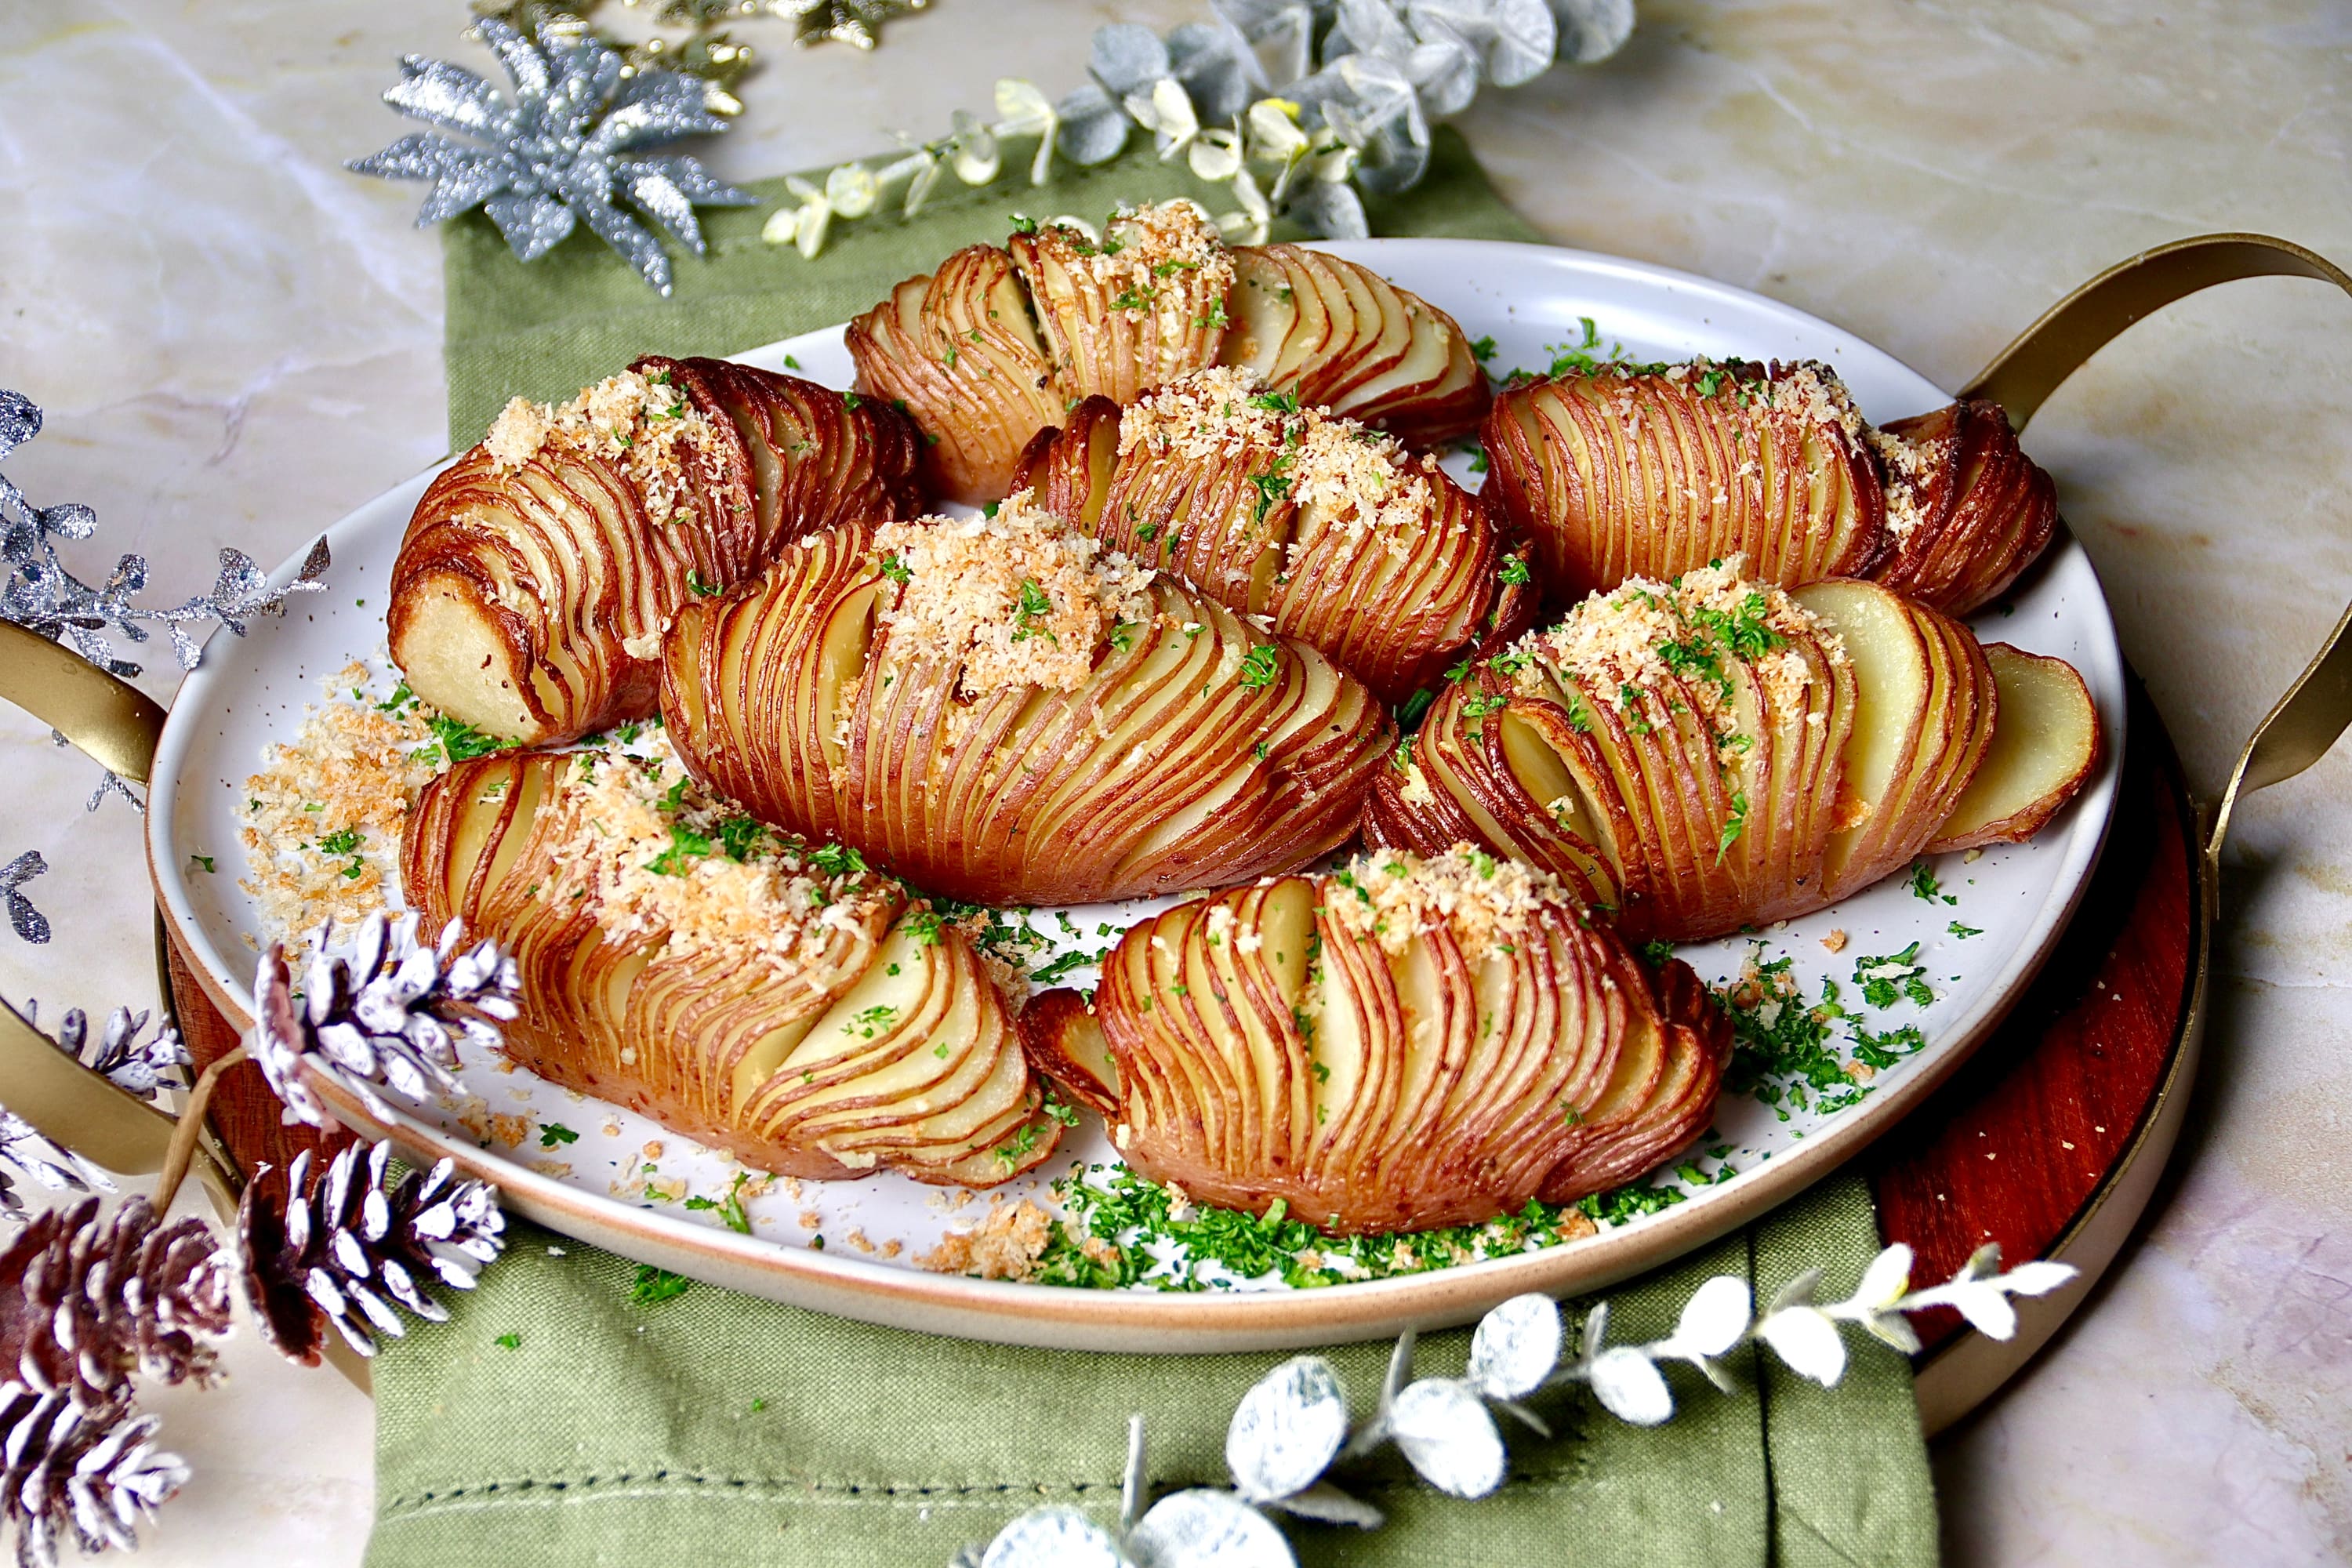 Hasselback potatoes garnished with parmesan crumbs and parsley